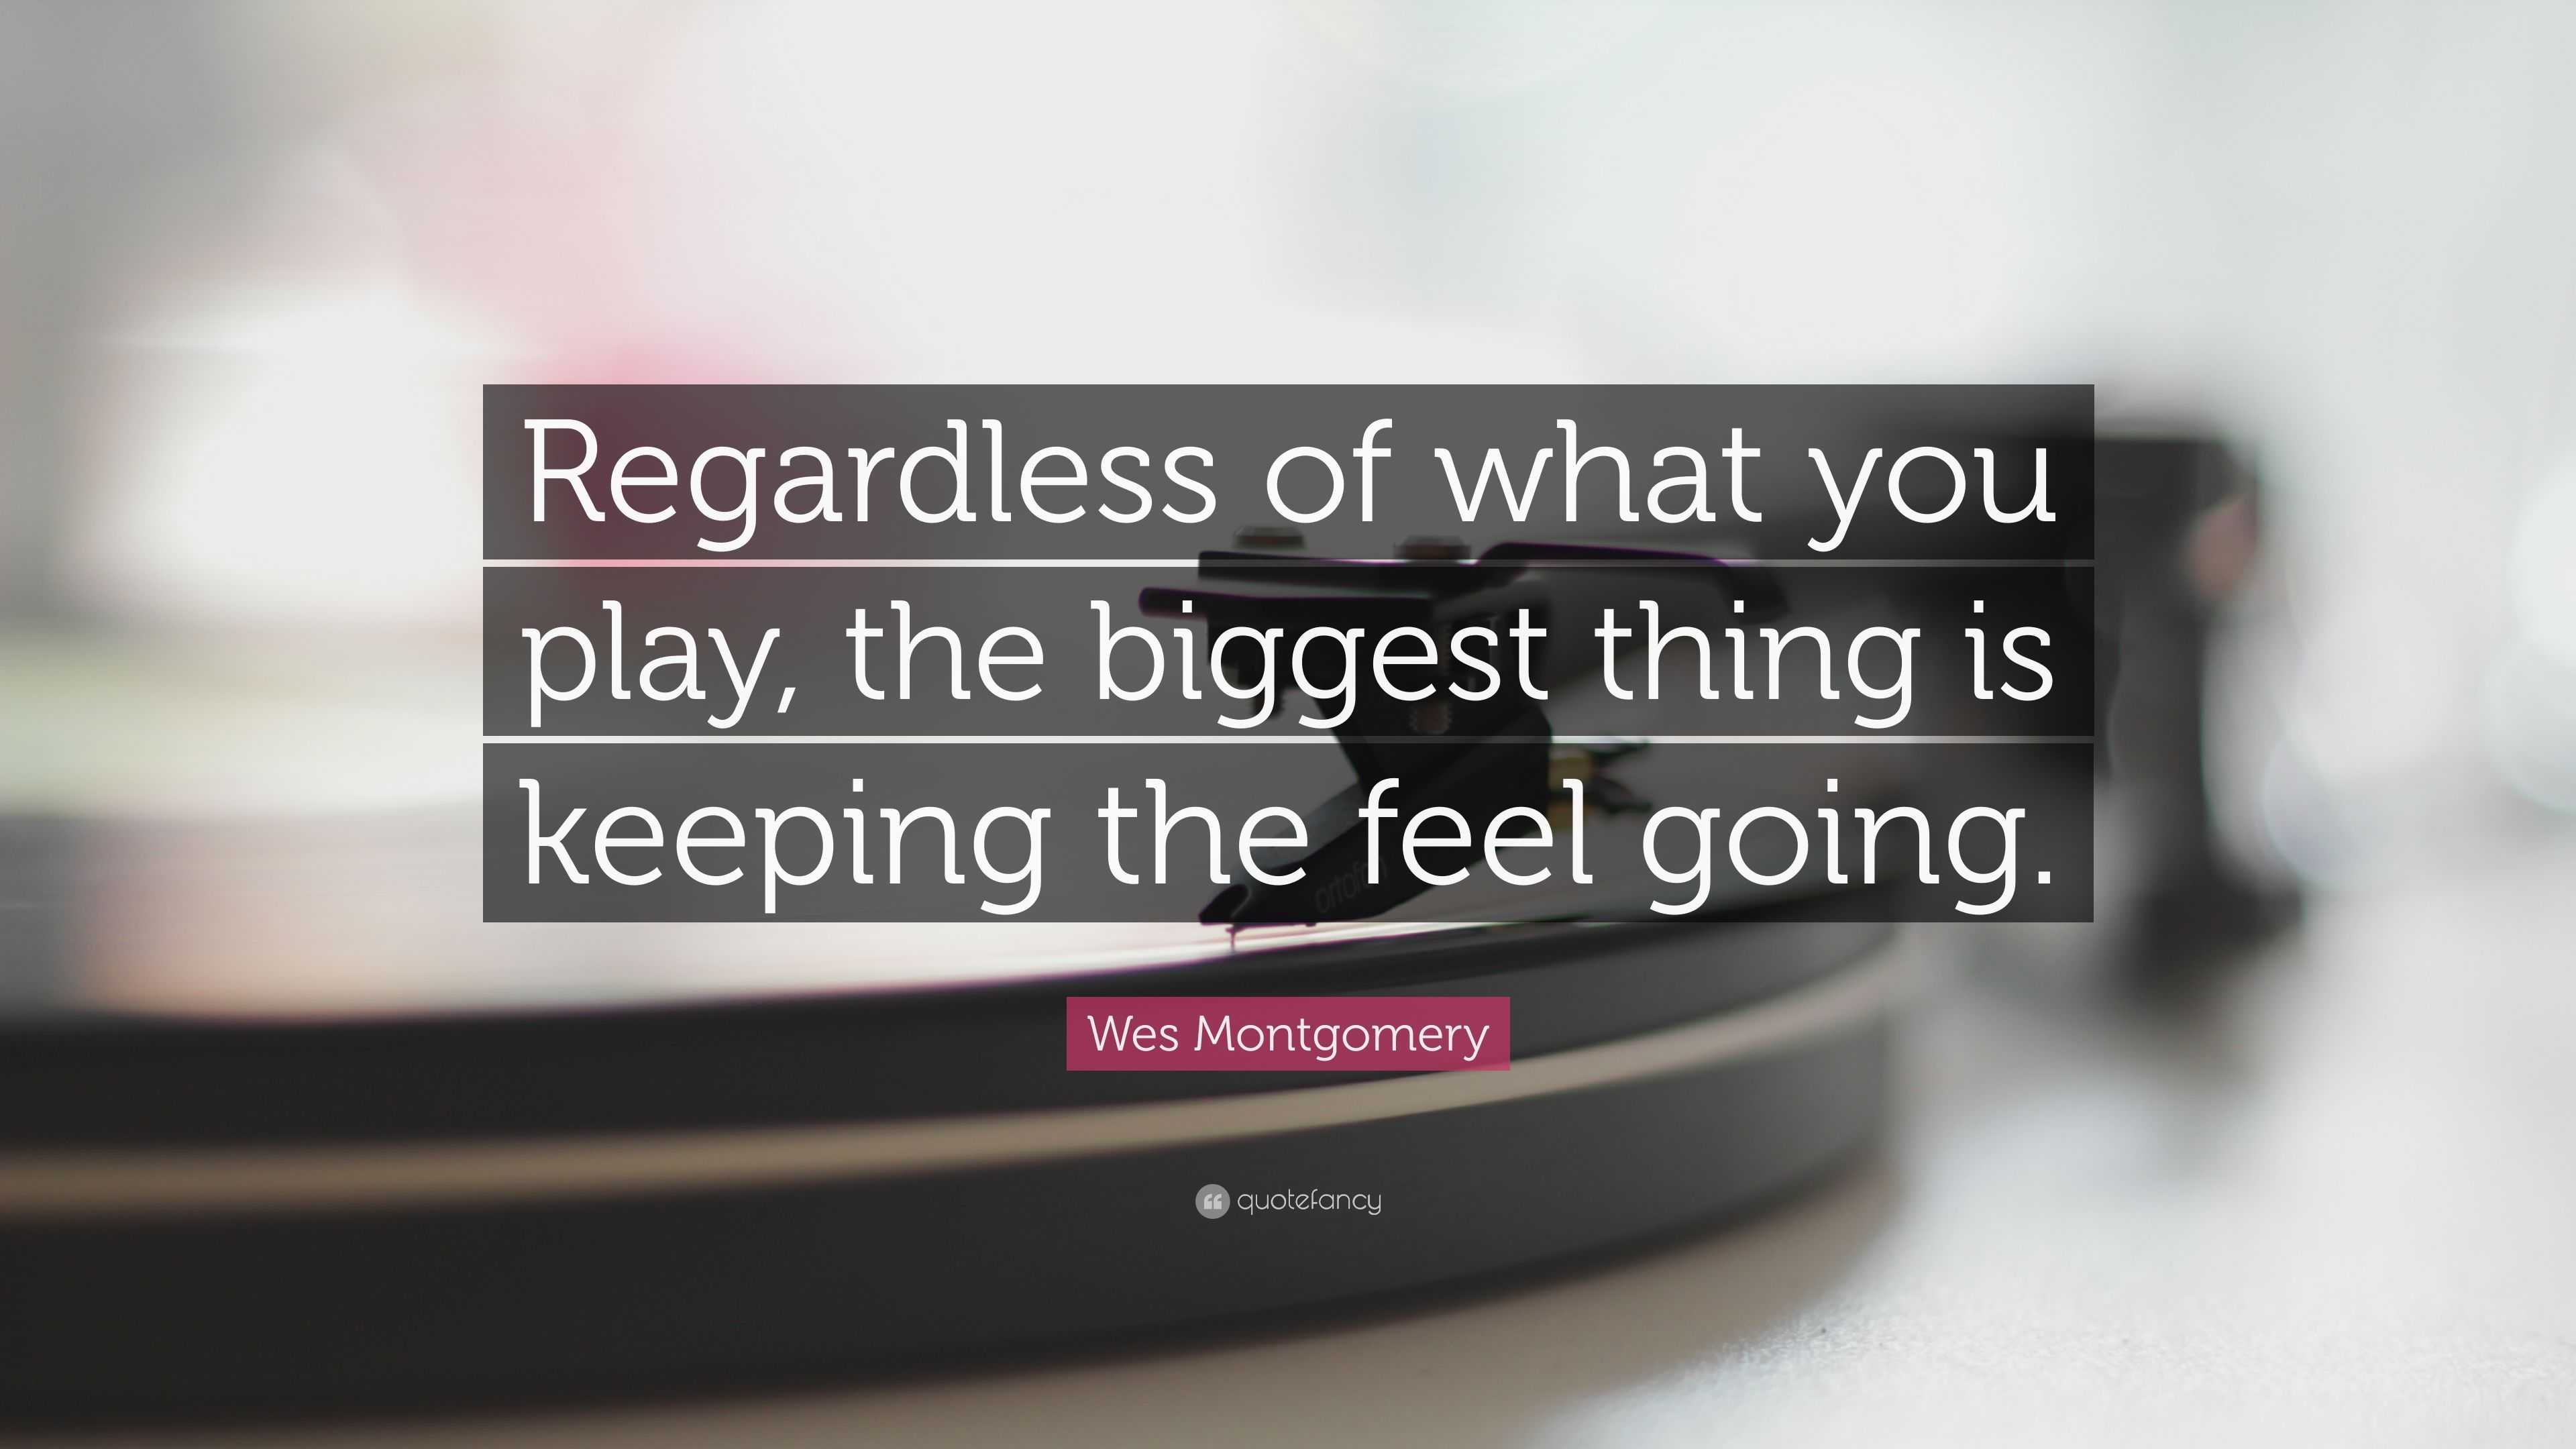 Wes Montgomery Quote: “Regardless of what you play, the biggest thing ...